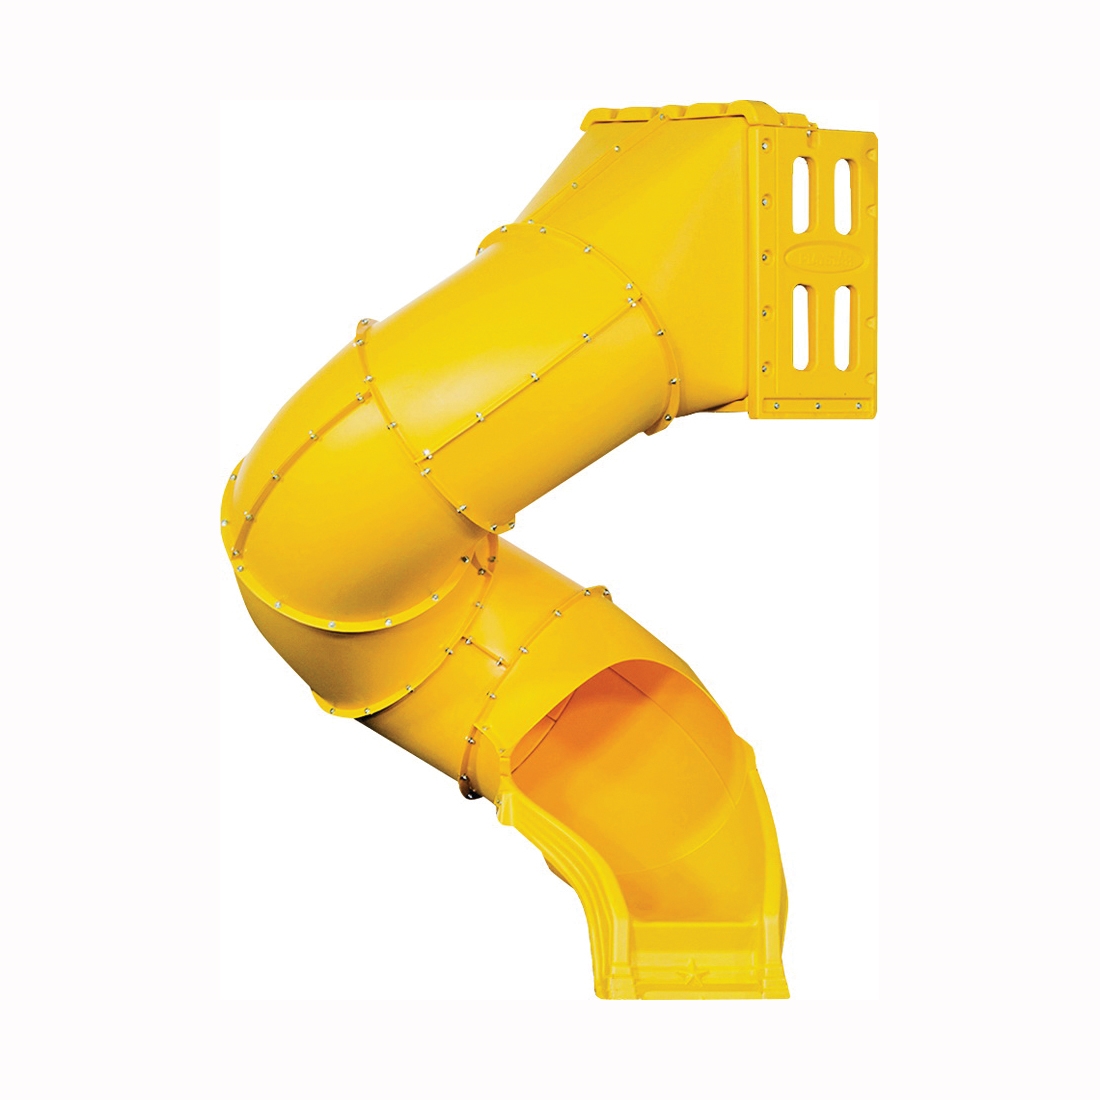 PS 8821 Spiral Tube Slide, HDPE, Yellow, For: 48 in, 60 in Playdeck